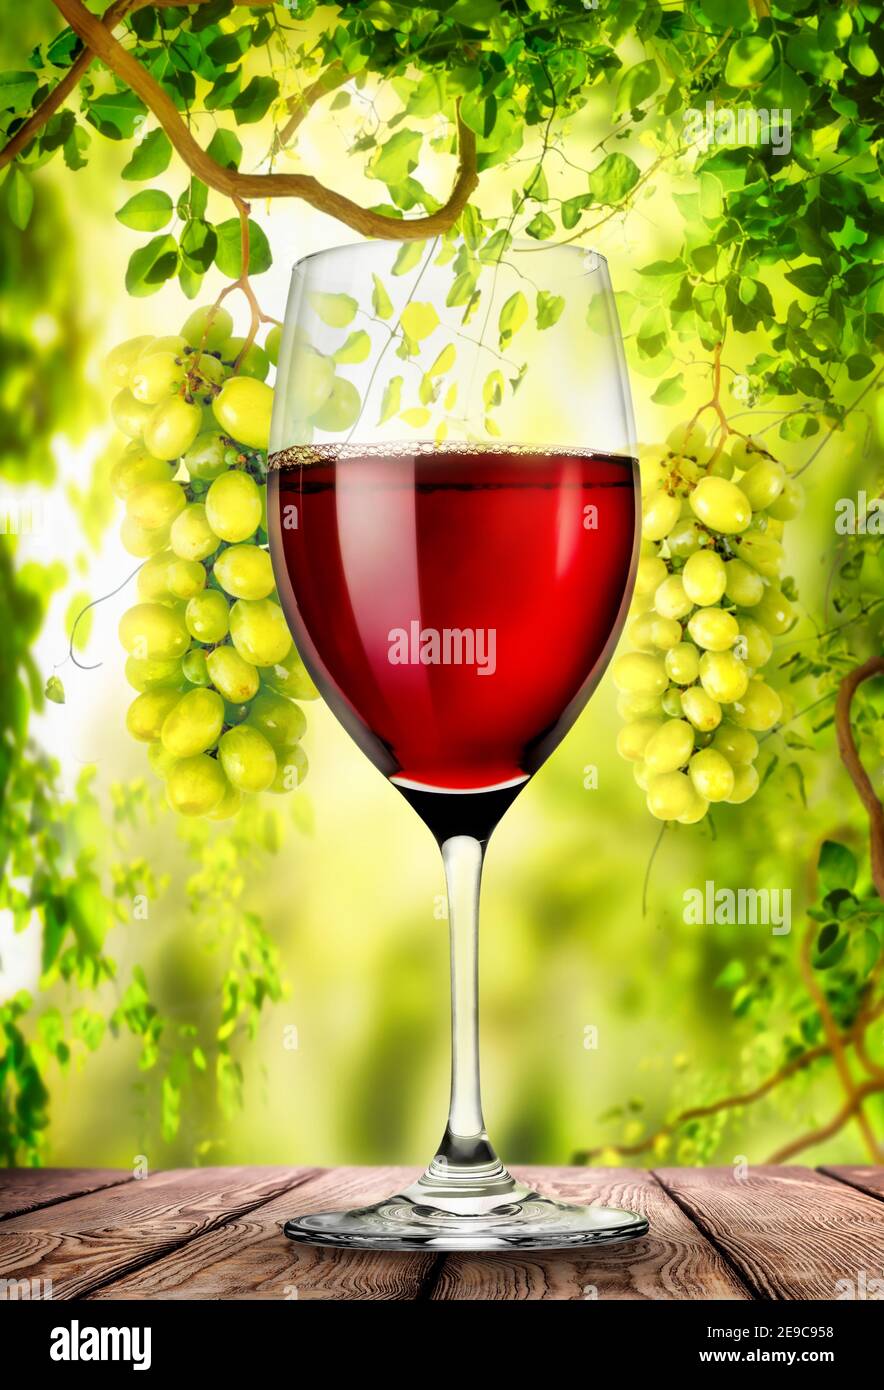 Red wine in glass and bottle against the background of the vineyard. Stock Photo